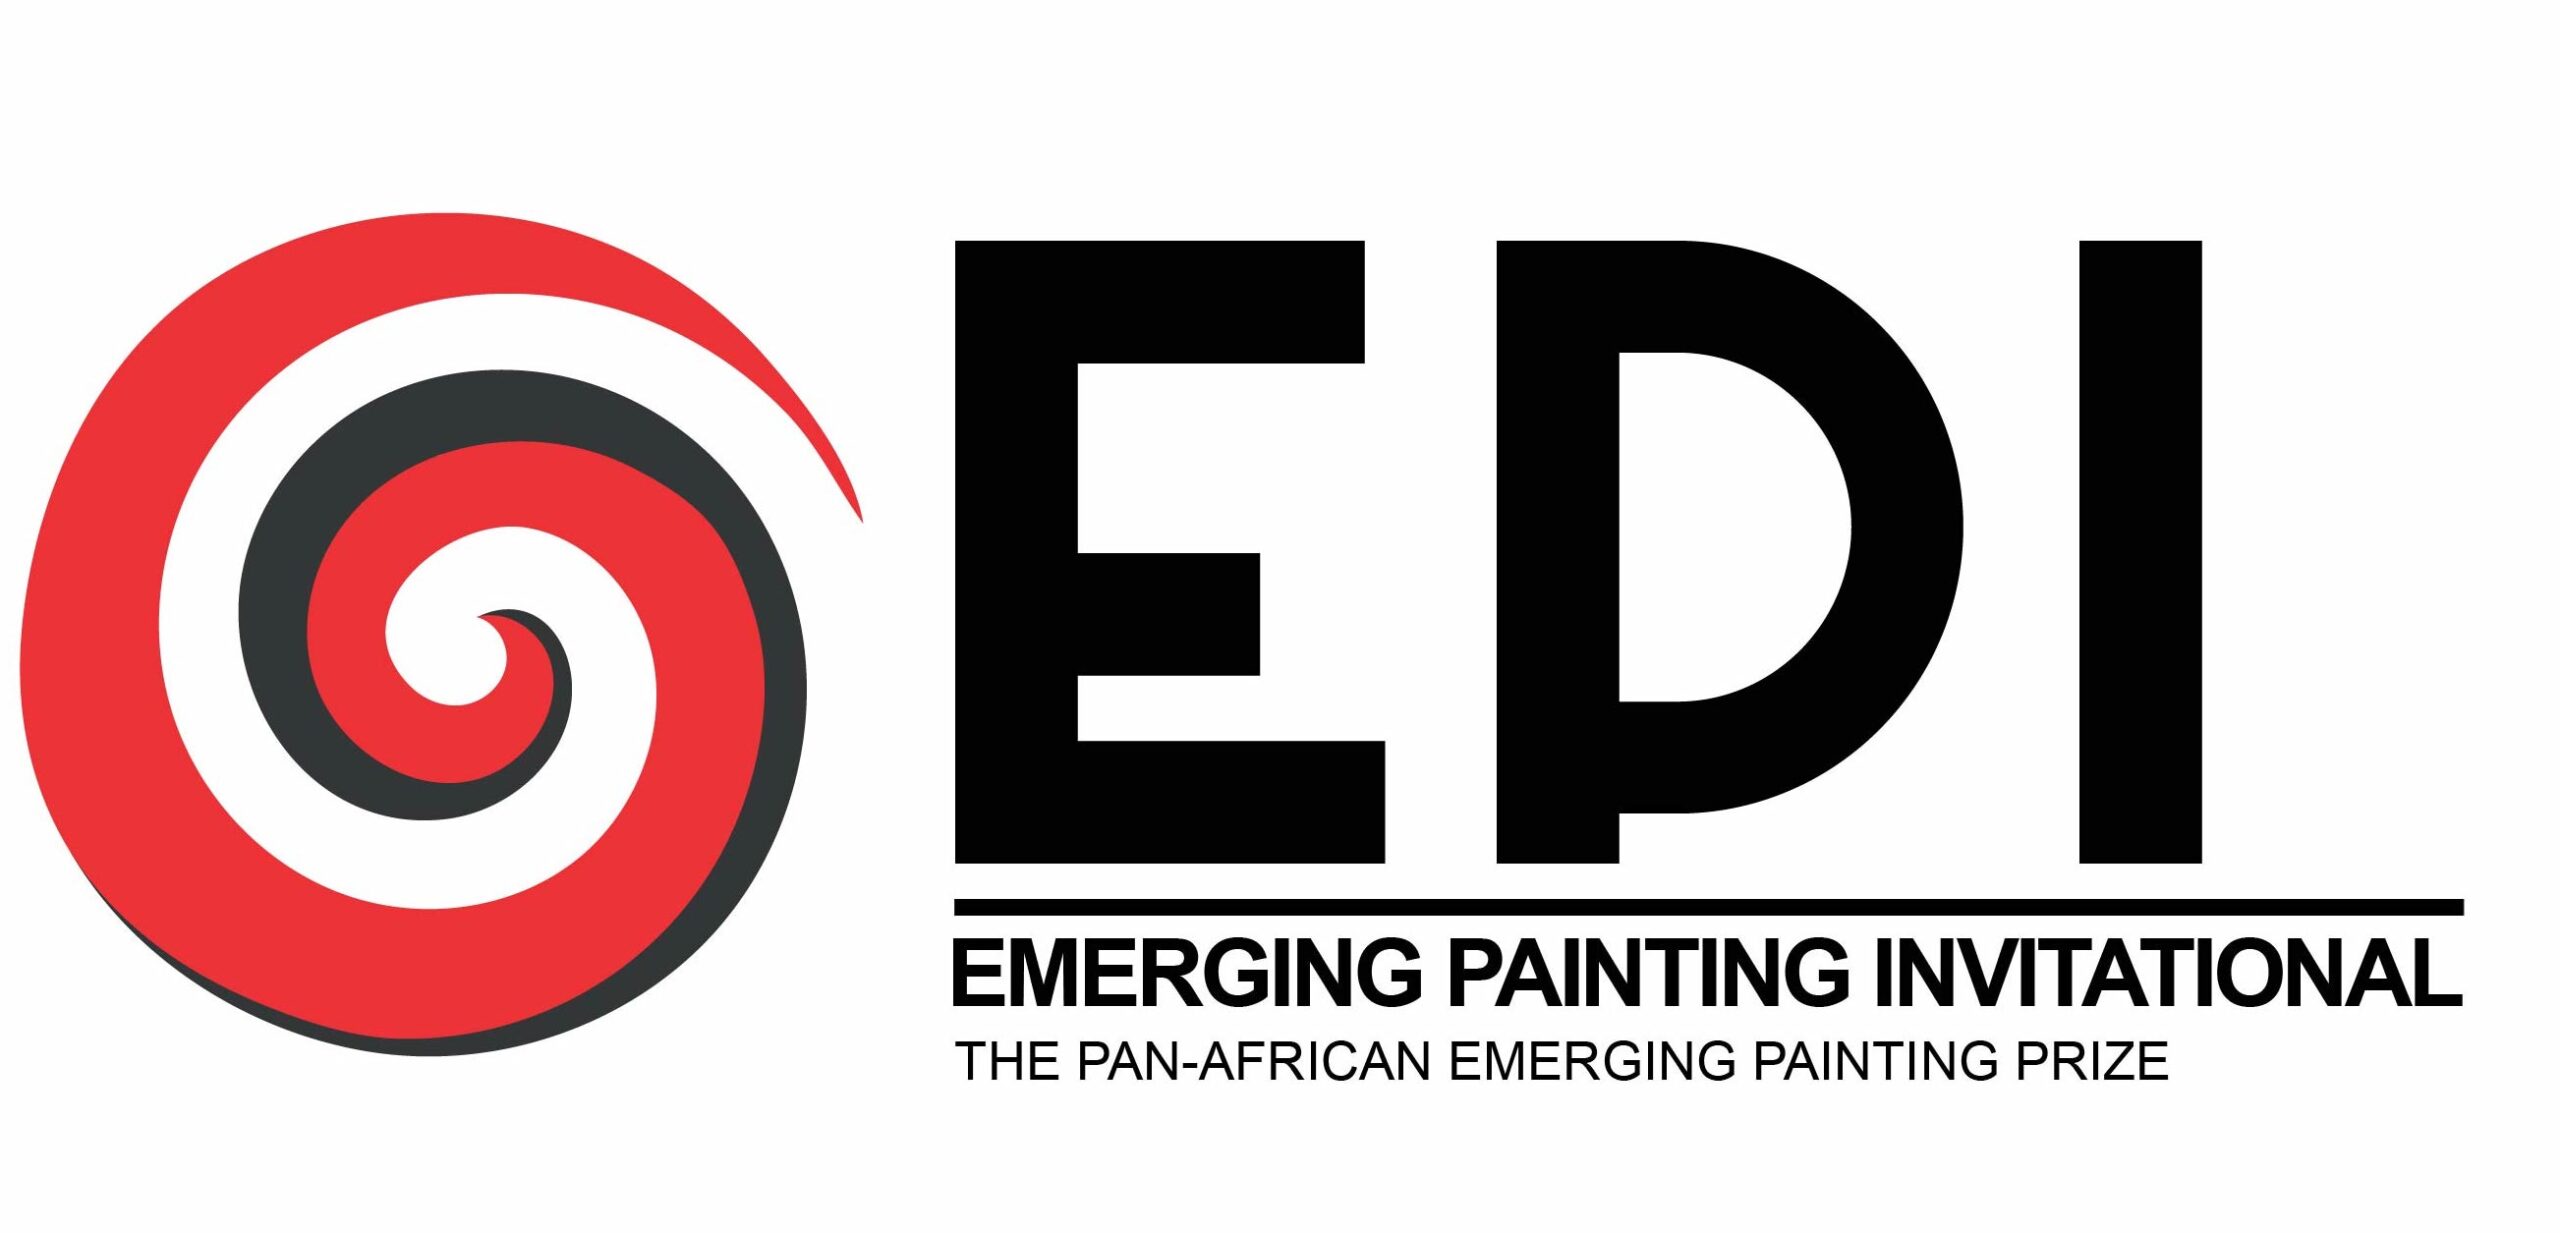 Emerging Painting Invitational (EPI) – Announces Finalists for its second edition online to take place 12 to 19 September, 2020